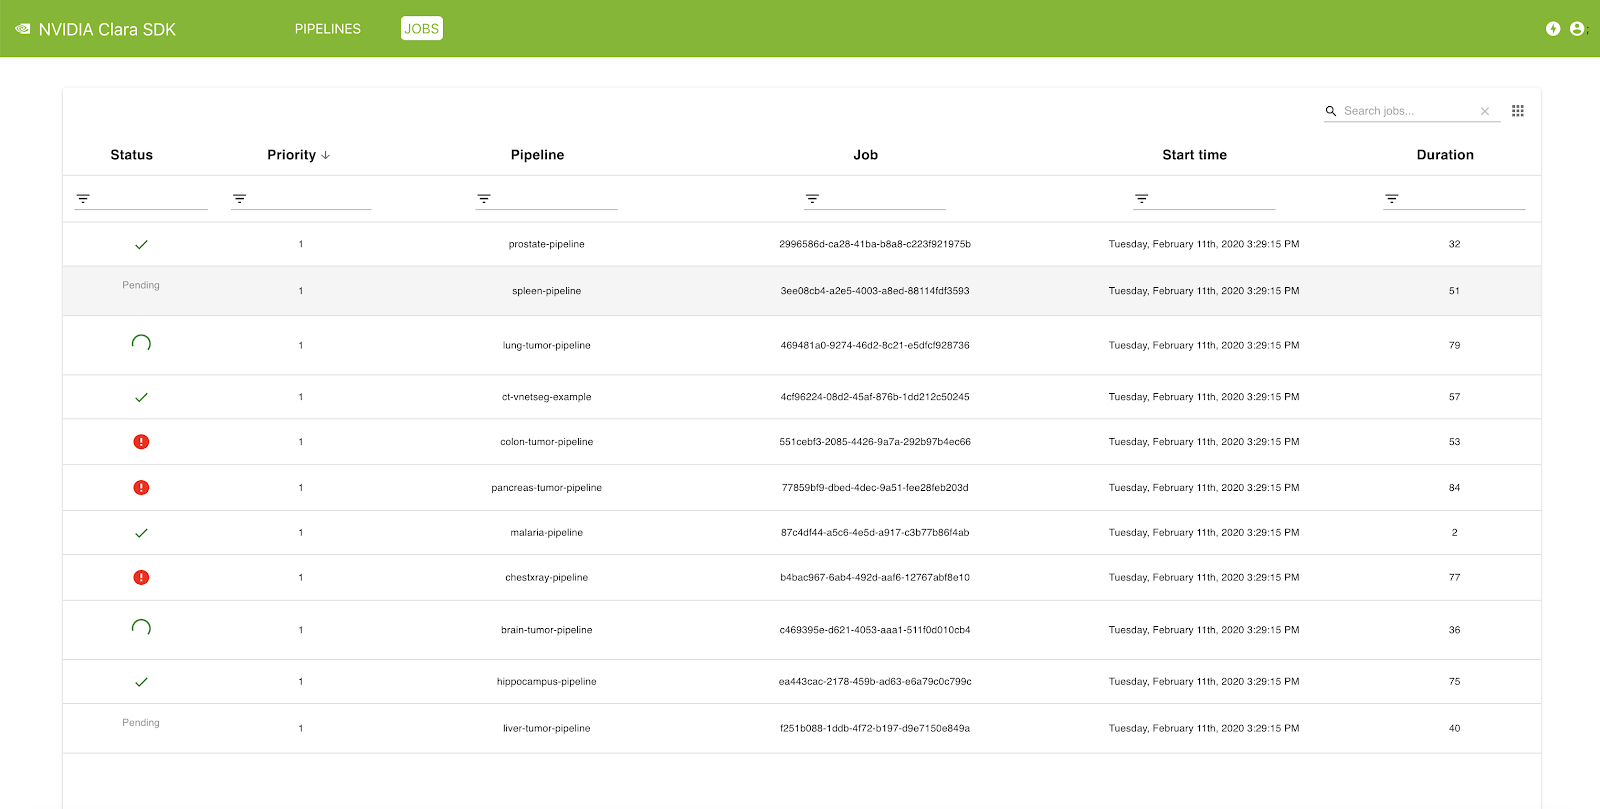 A screenshot of the Clara Deploy management console, showing details of jobs in the queue, jobs currently processing, and jobs completed.